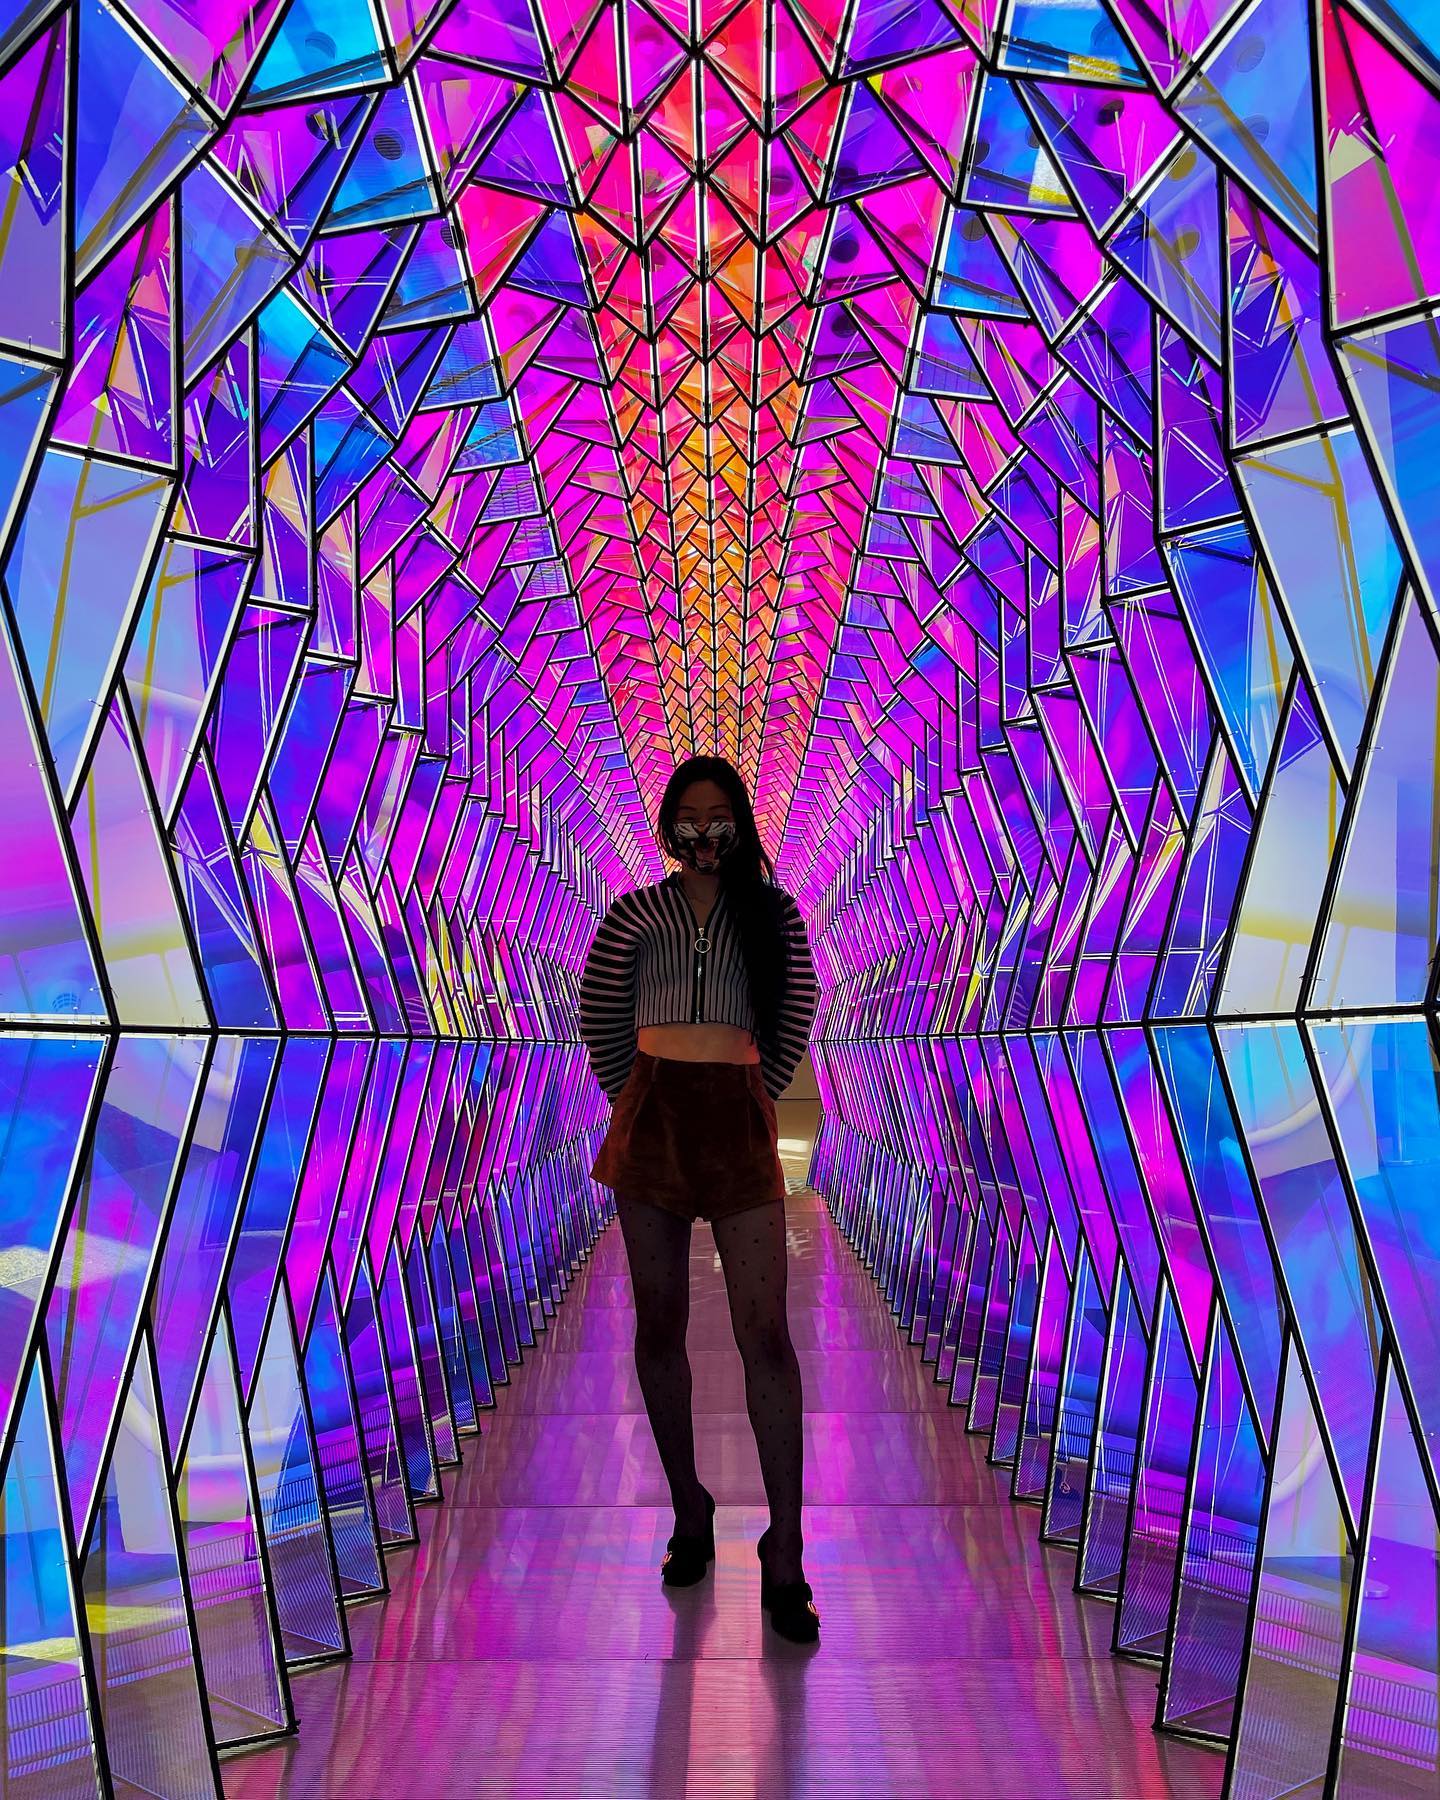 SFMOMA on Twitter: "🧵Bright lights, striking poses user with Eliasson's “One-way colour tunnel," 2007 https://t.co/hEPwpBk6dx" / Twitter